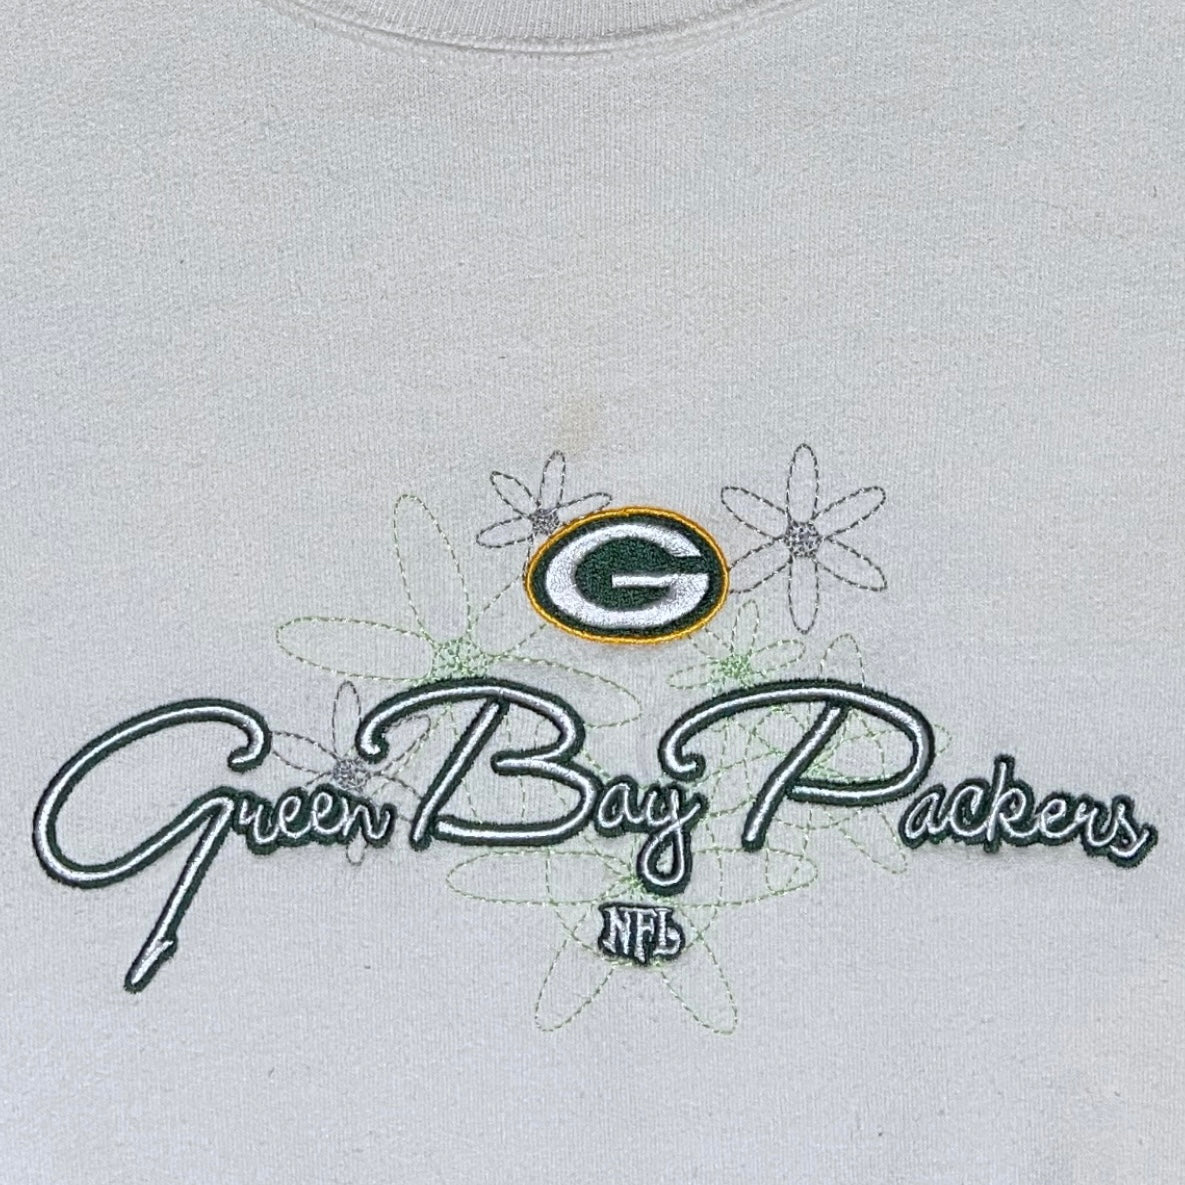 Green Bay Packers sweater - M